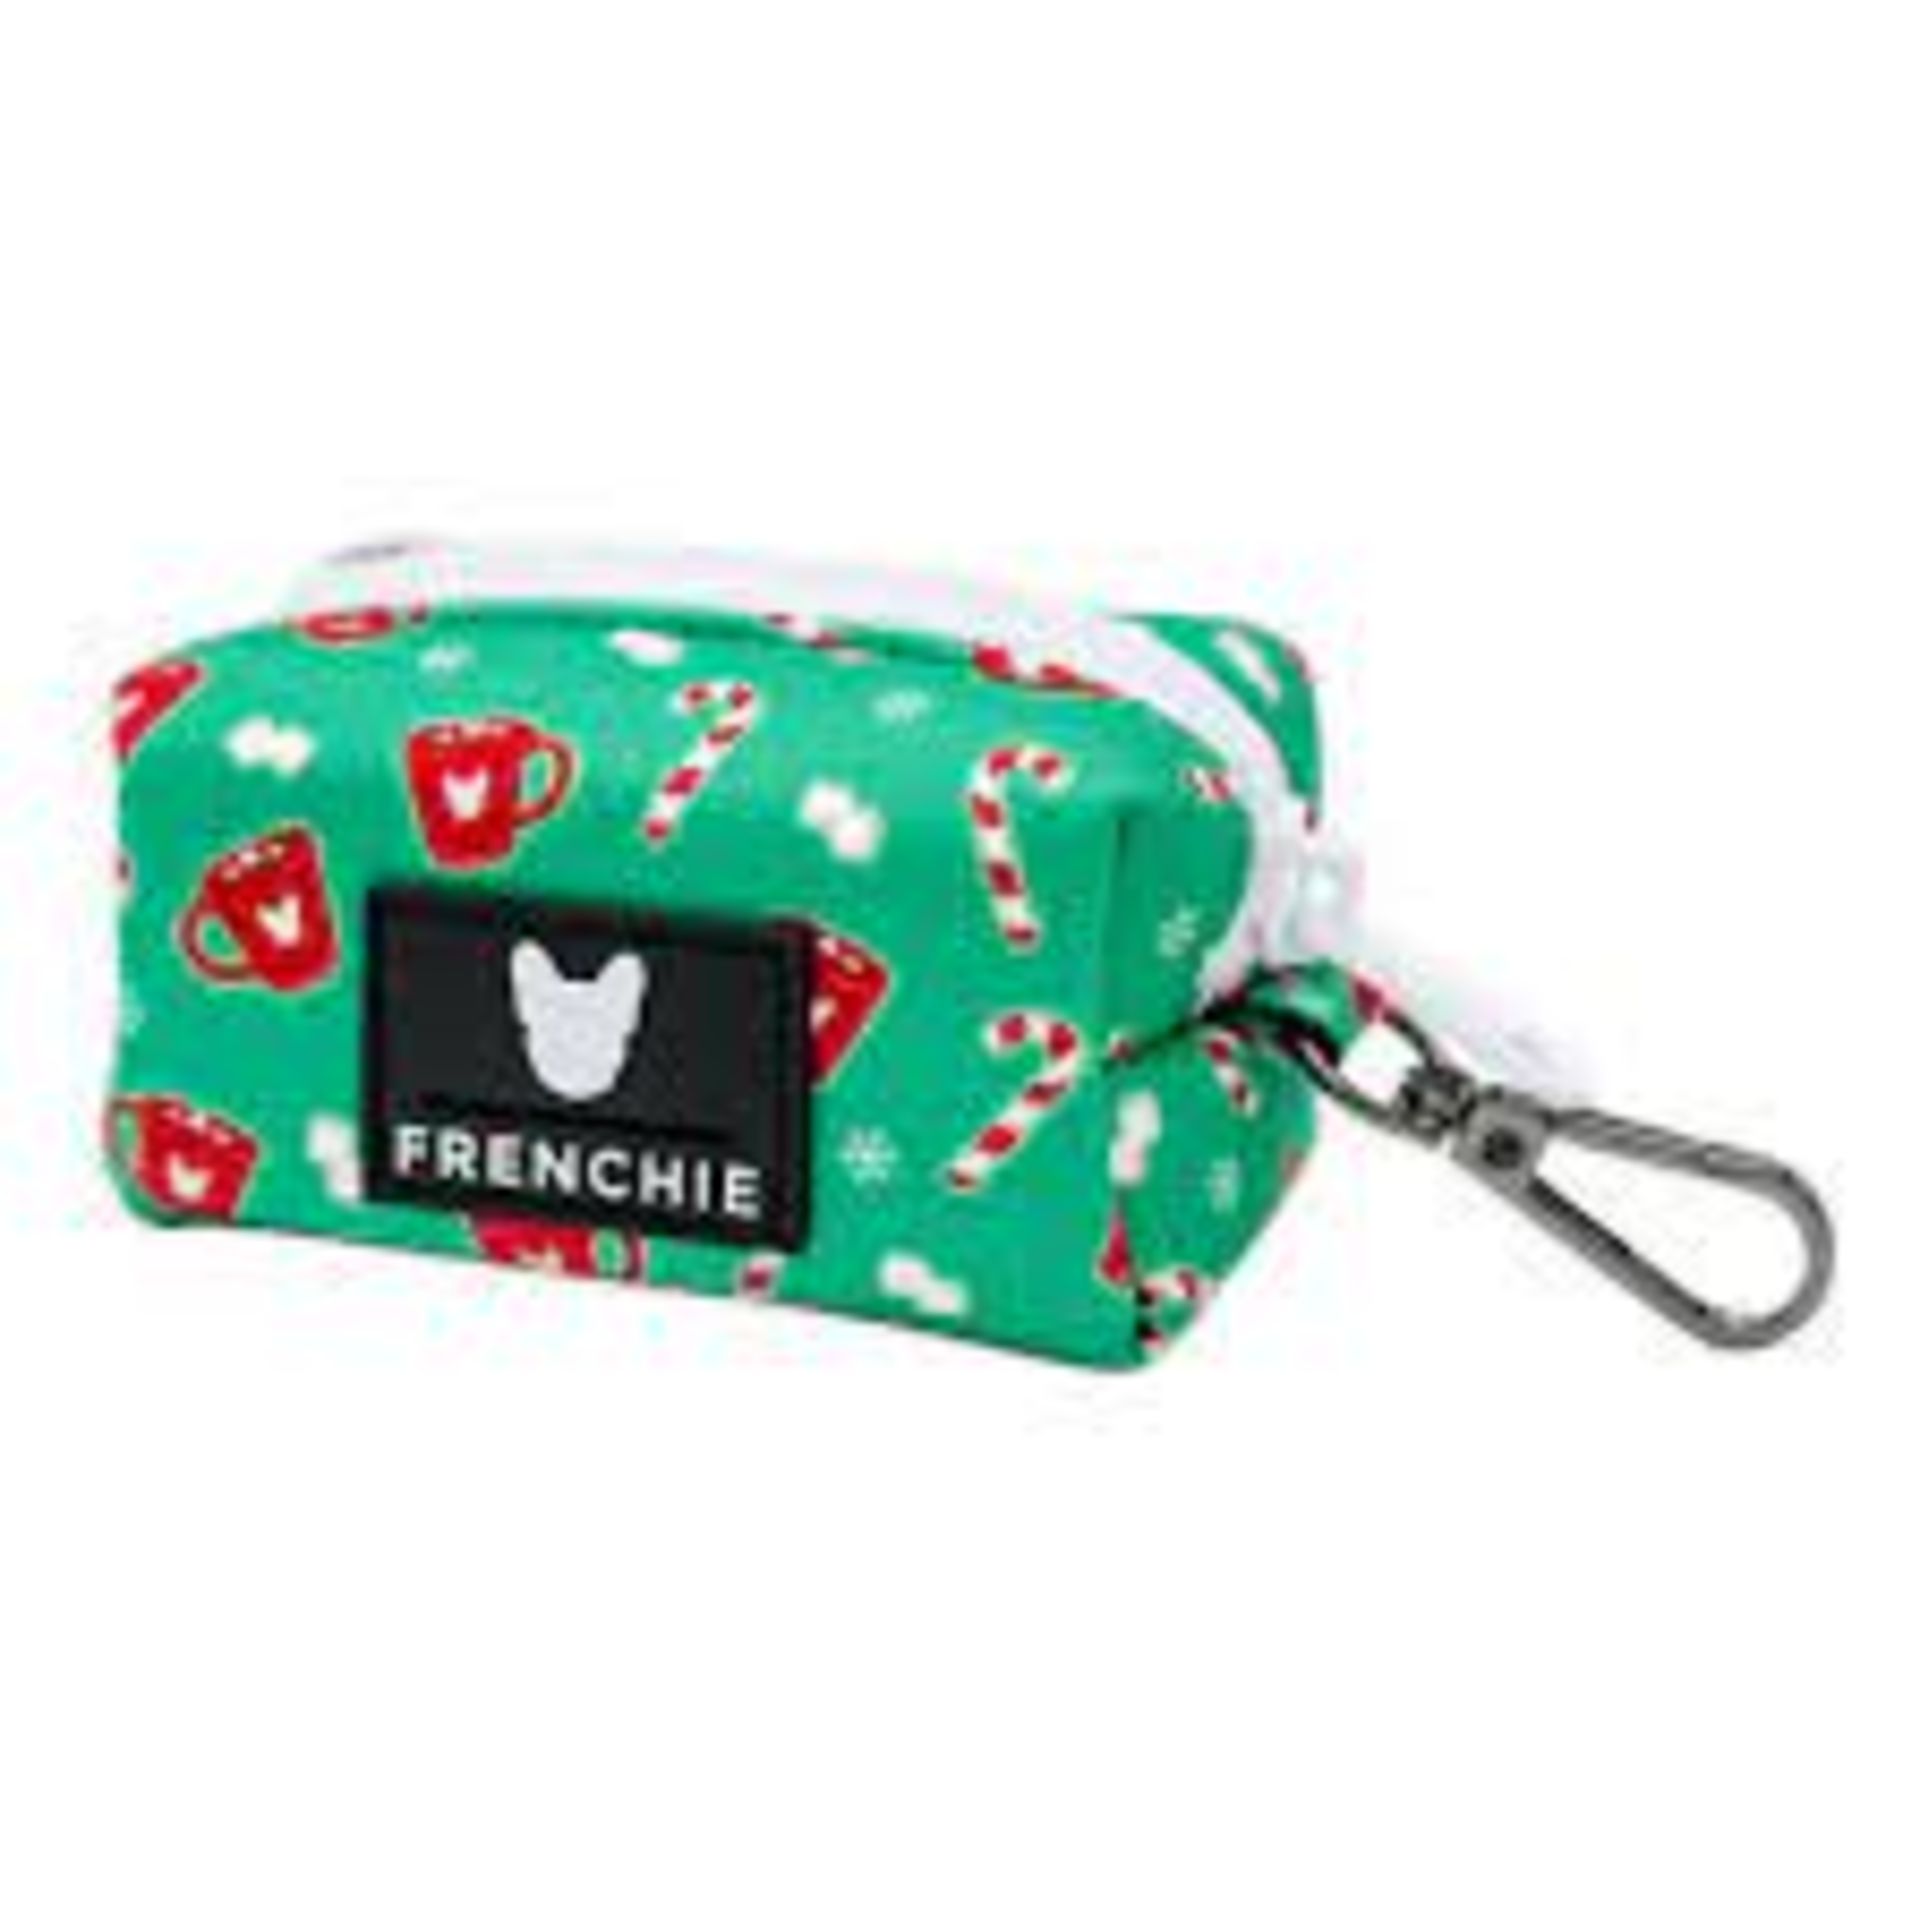 Bulk Trade Lot 1000 X New Packaged Frenchie The Bulldog Luxury Branded Dog Products. May include - Image 12 of 50